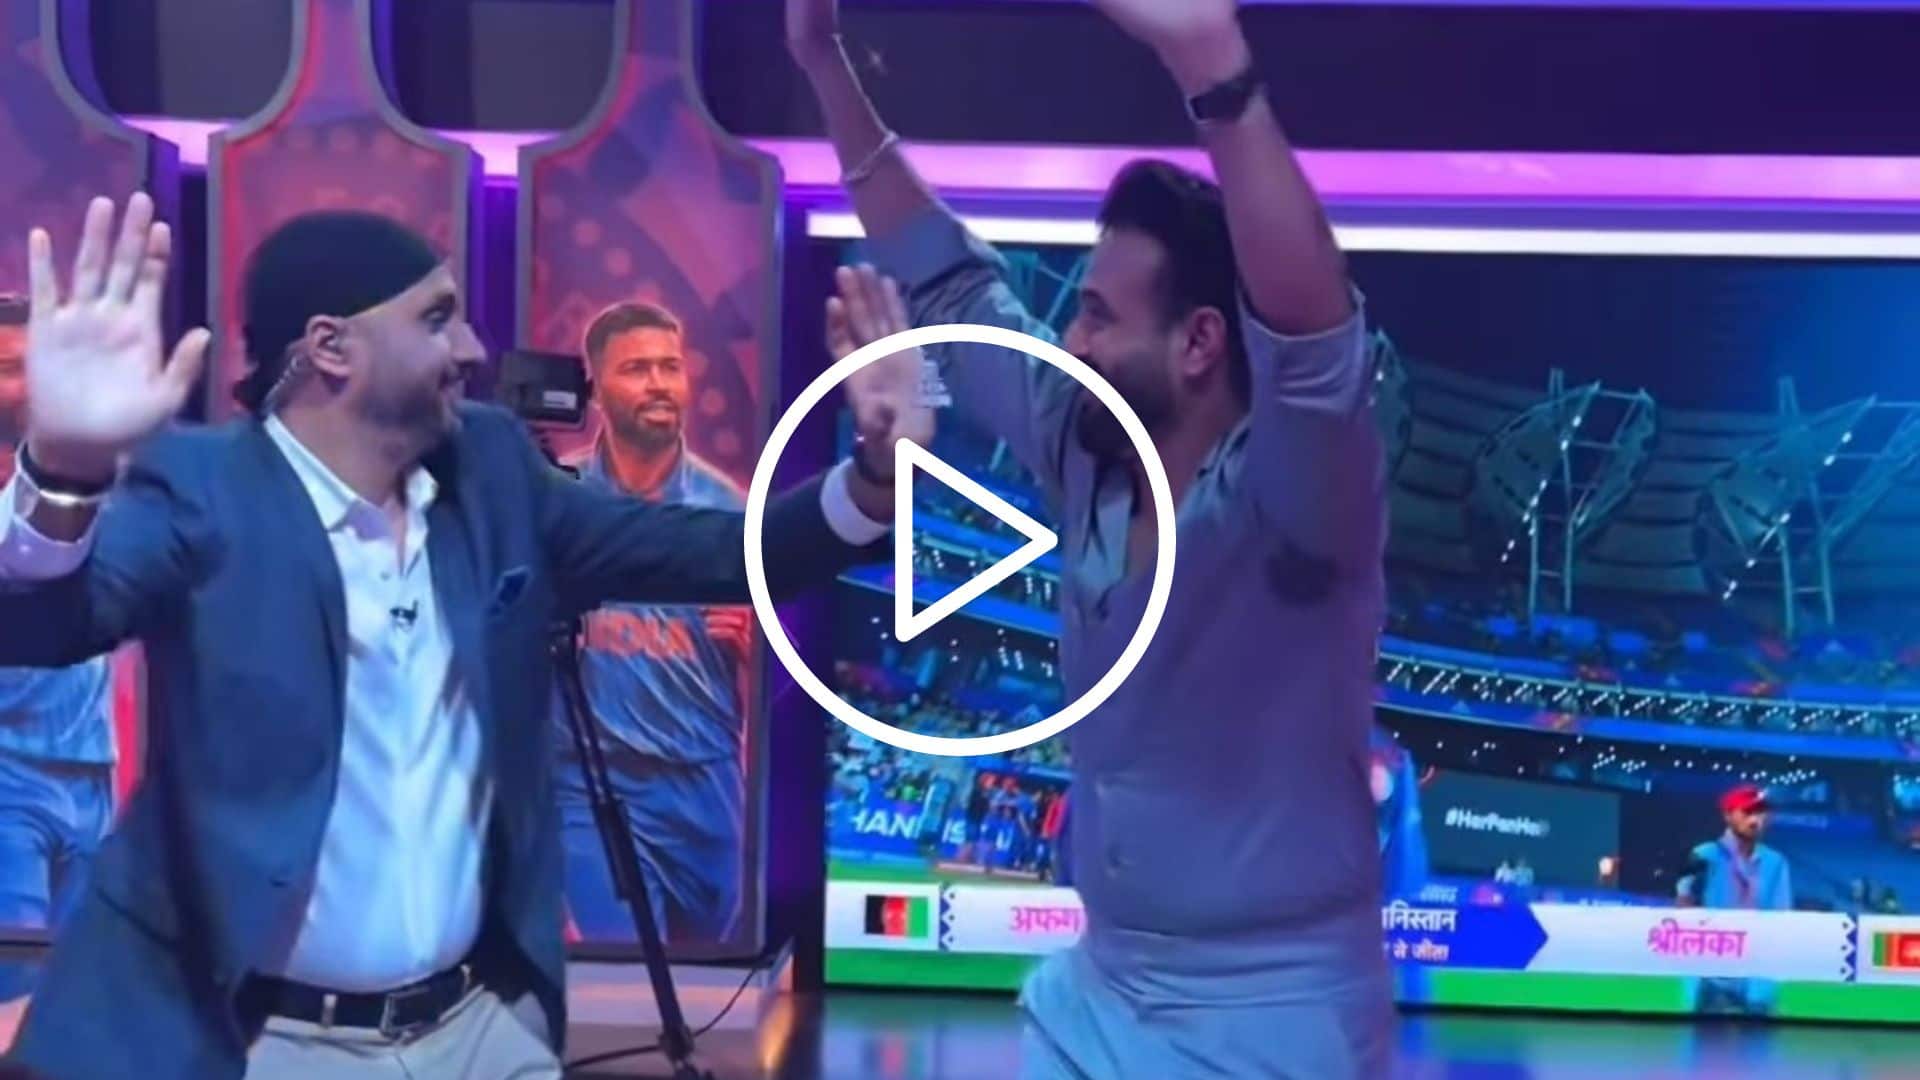 [Watch] Irfan Pathan Celebrates After AFG's Win Over SL With Harbhajan Singh